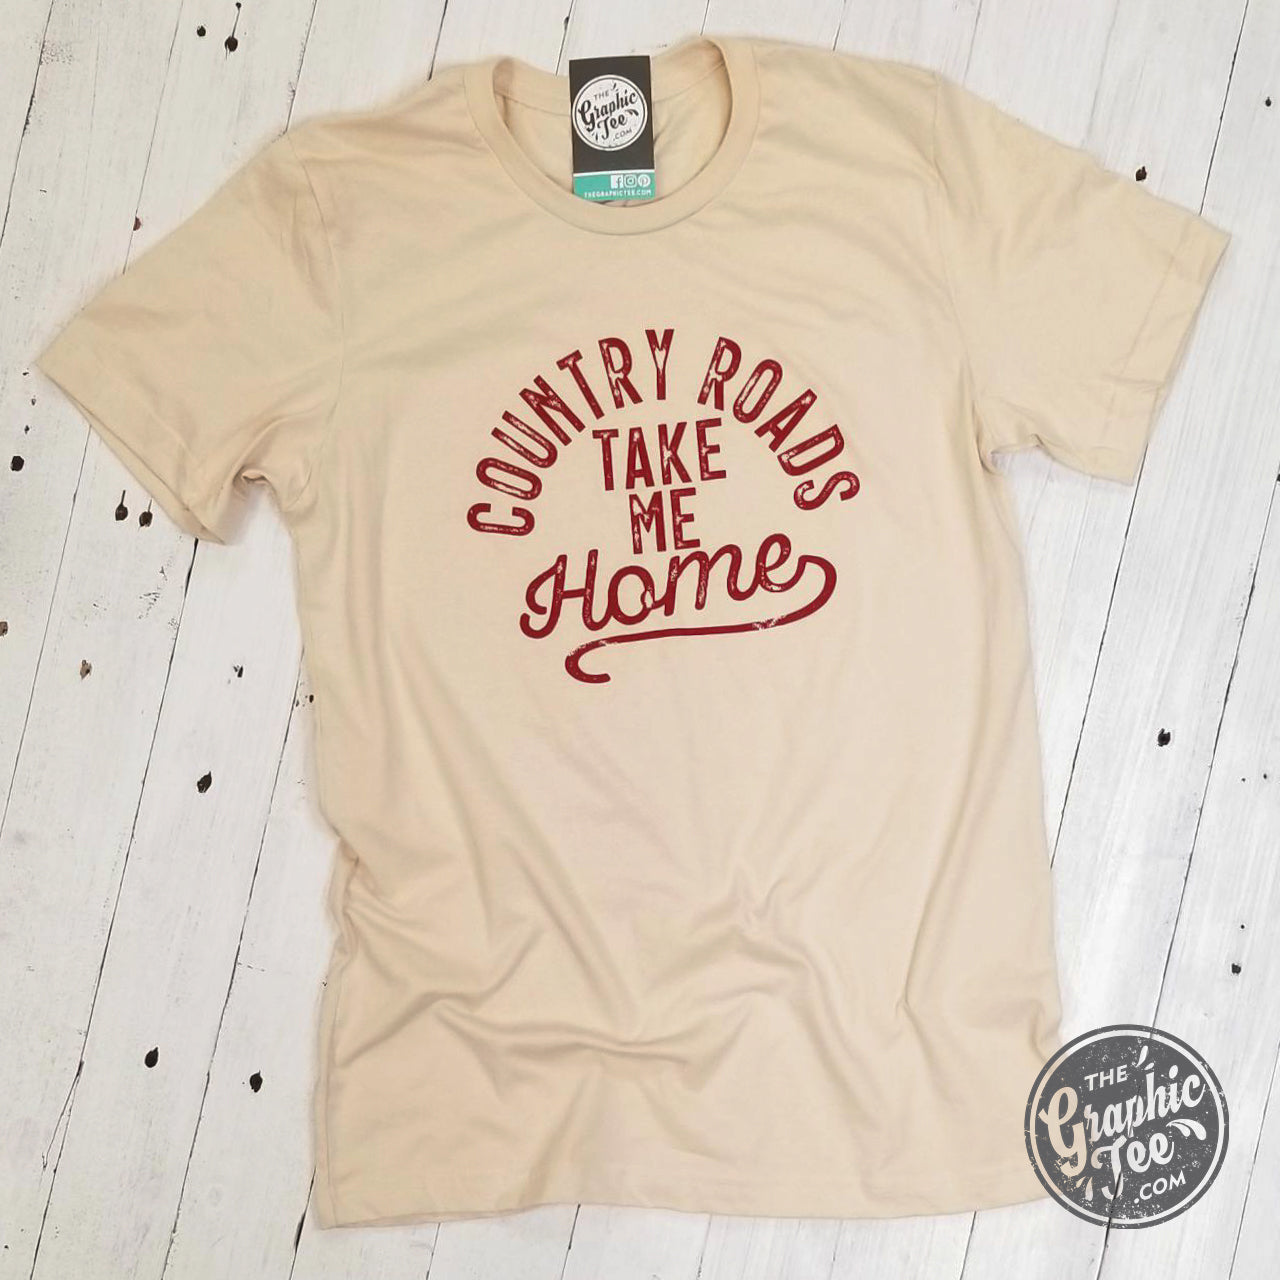 *WHOLESALE* Country Roads Take Me Home - Unisex Tee